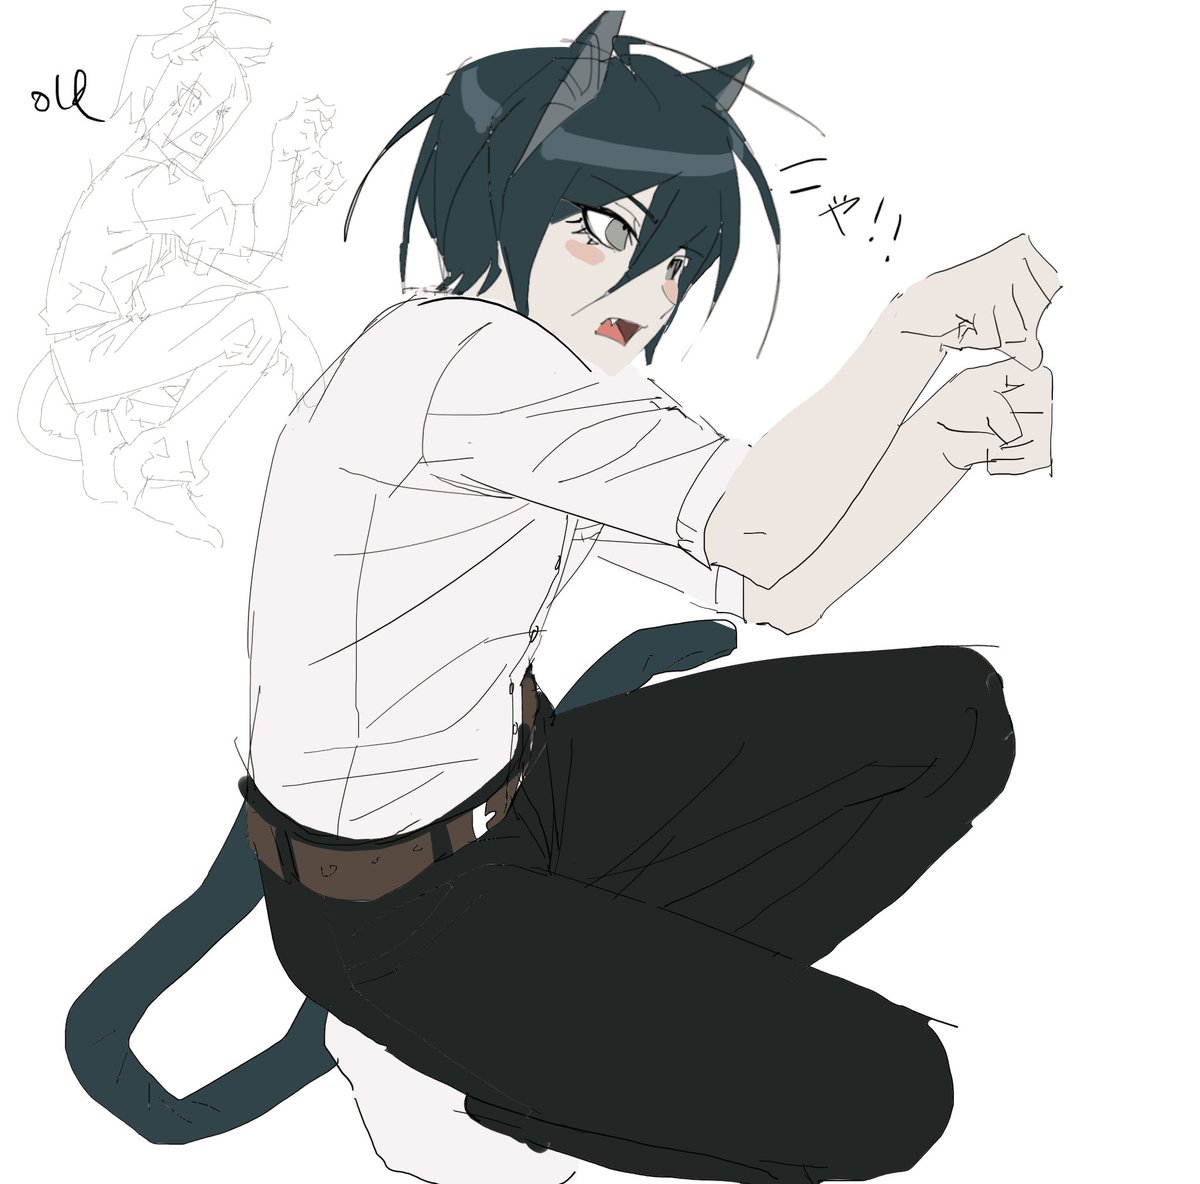 Redraw of art from when i was 13 roleplaying as a catboy in gacha life